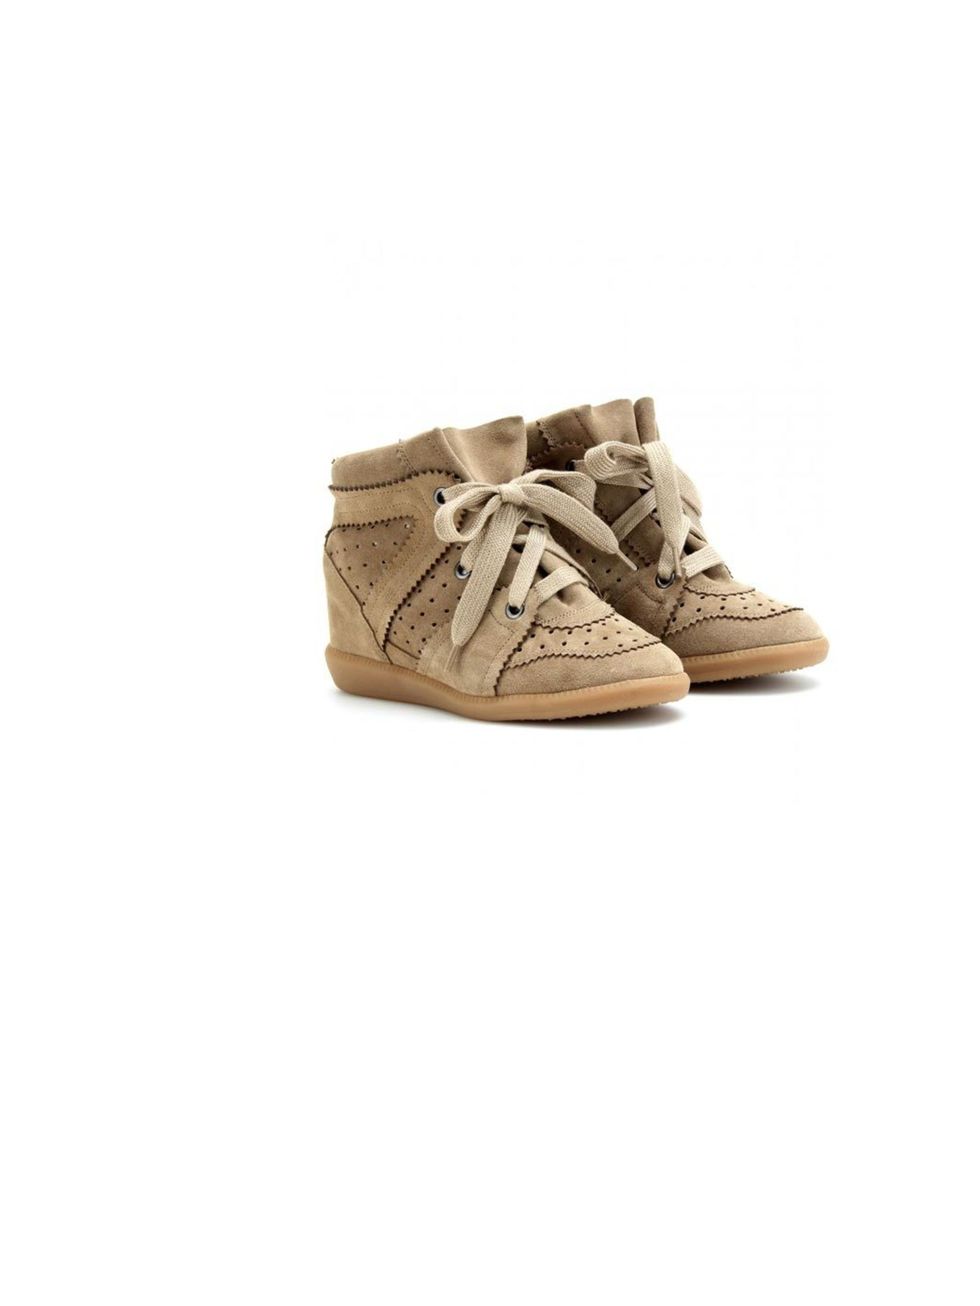 <p>Isabel Marant 'Bobby' sneakers, £385, at <a href="http://www.mytheresa.com/uk_en/bobby-wedge-suede-sneakers.html">mytheresa.com</a></p>